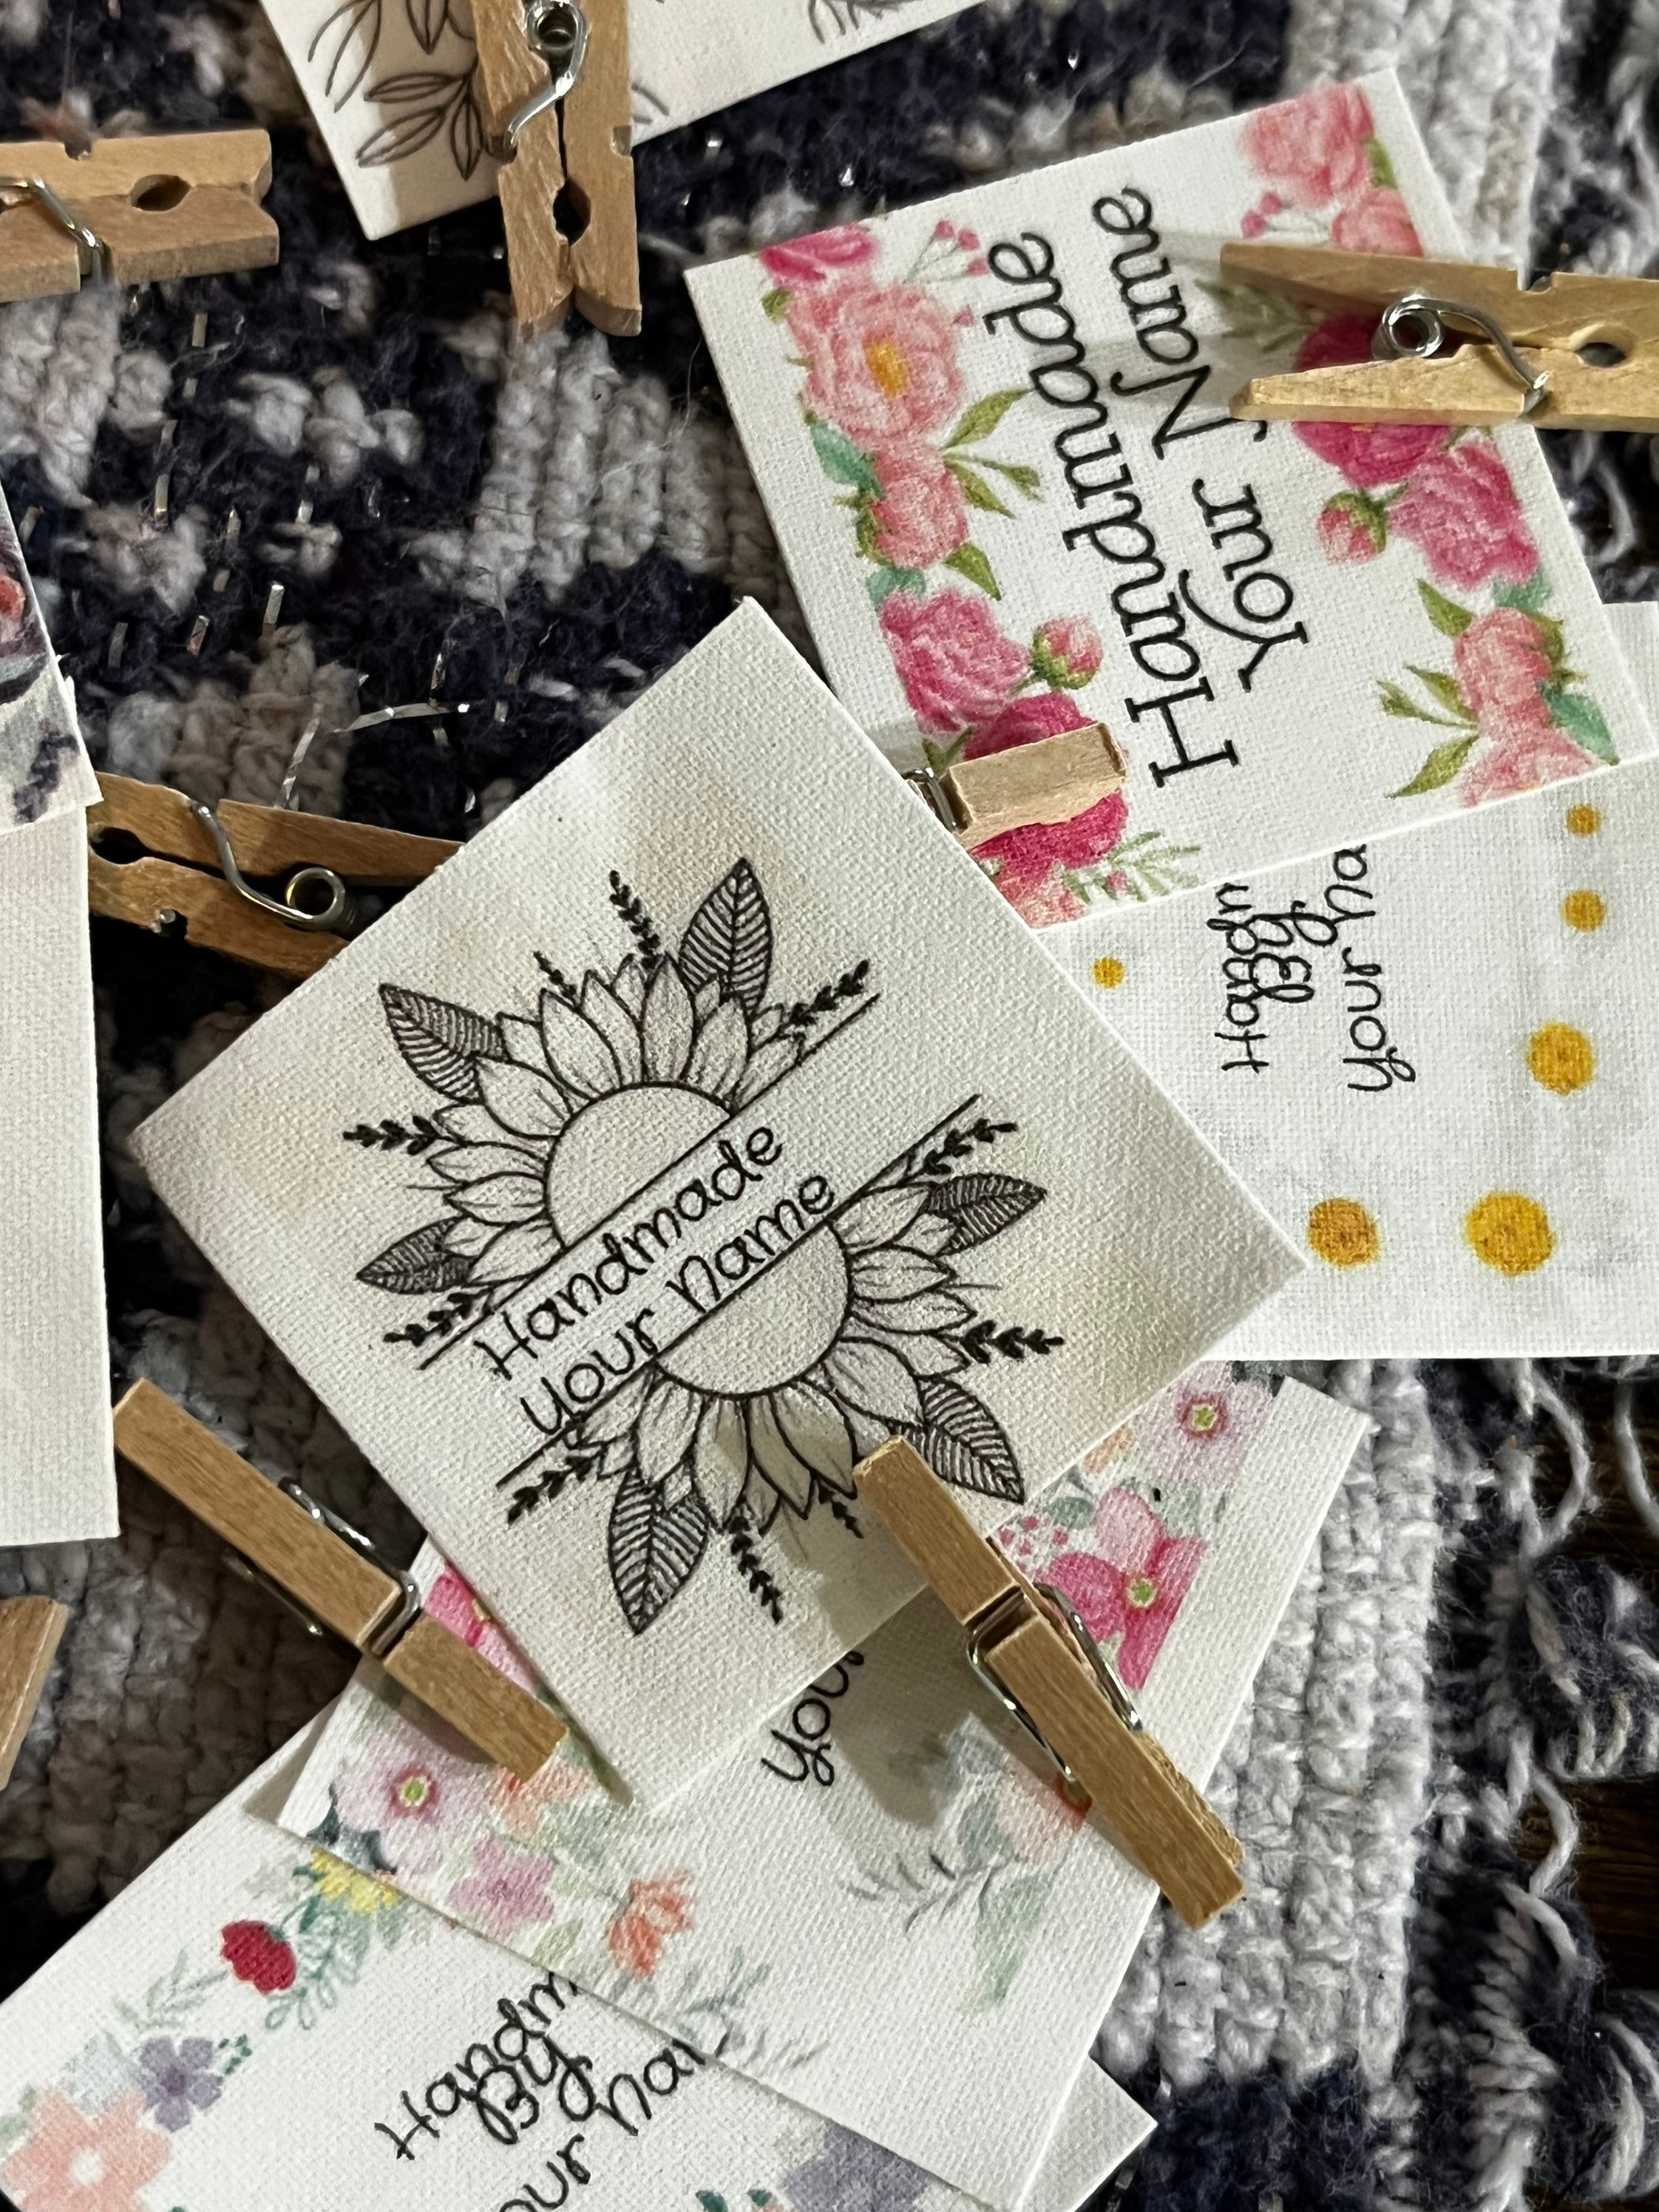 Tags for Handmade Items, Handmade With Love Tags, Sewing Tags, Made With  Love Labels, Custom Knitting Tags, Knitting Tags 